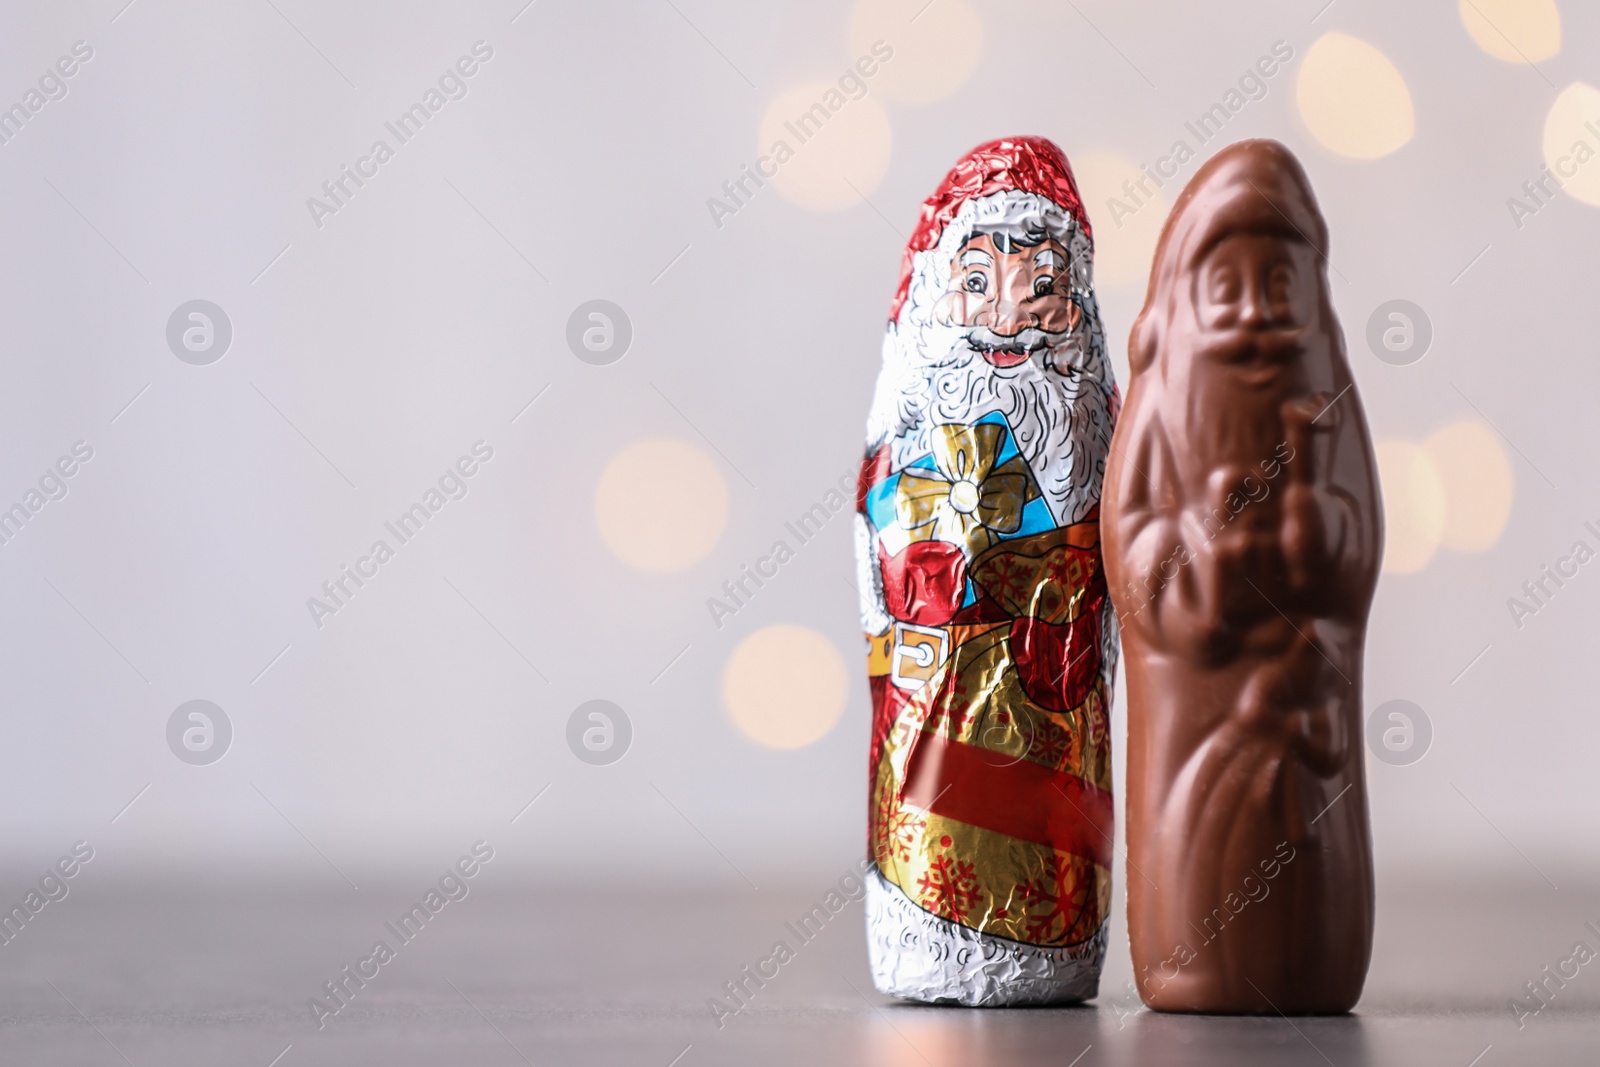 Photo of Chocolate Santa Claus candies on light background, space for text